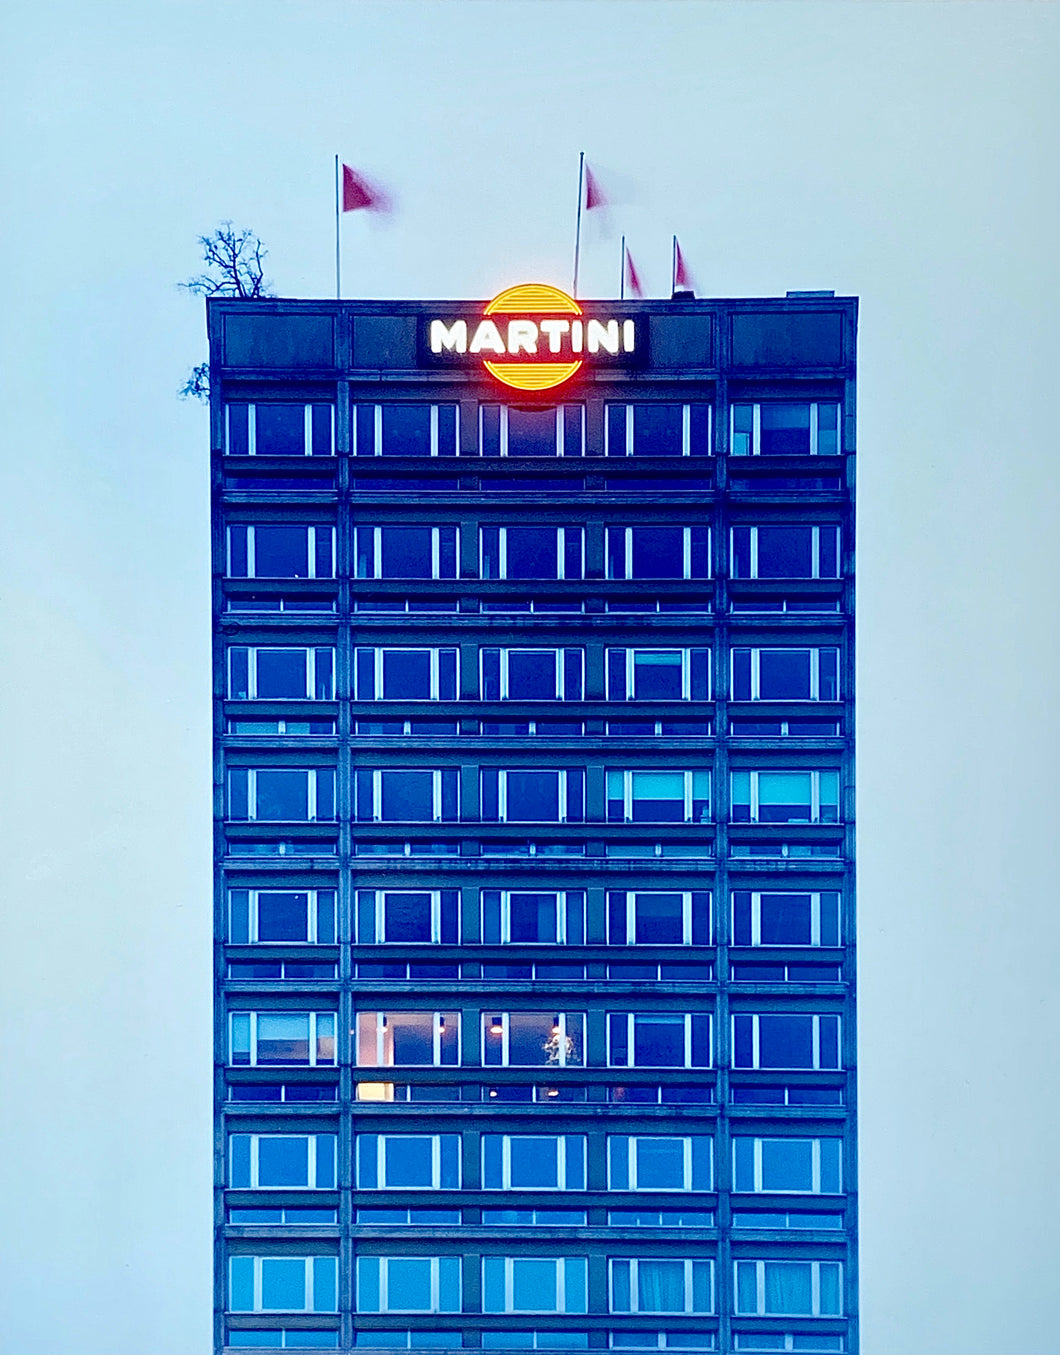 Central Milan's rooftop bar Terazza Martini, is the subject of Richard Heeps' 'Blue Martini, Milan, 2019', taken as part of his series 'A Short History of Milan'. There is a reoccurring linear, structural theme throughout the series, capturing the Milanese use of materials in design such as glass, metal, wood and stone. 